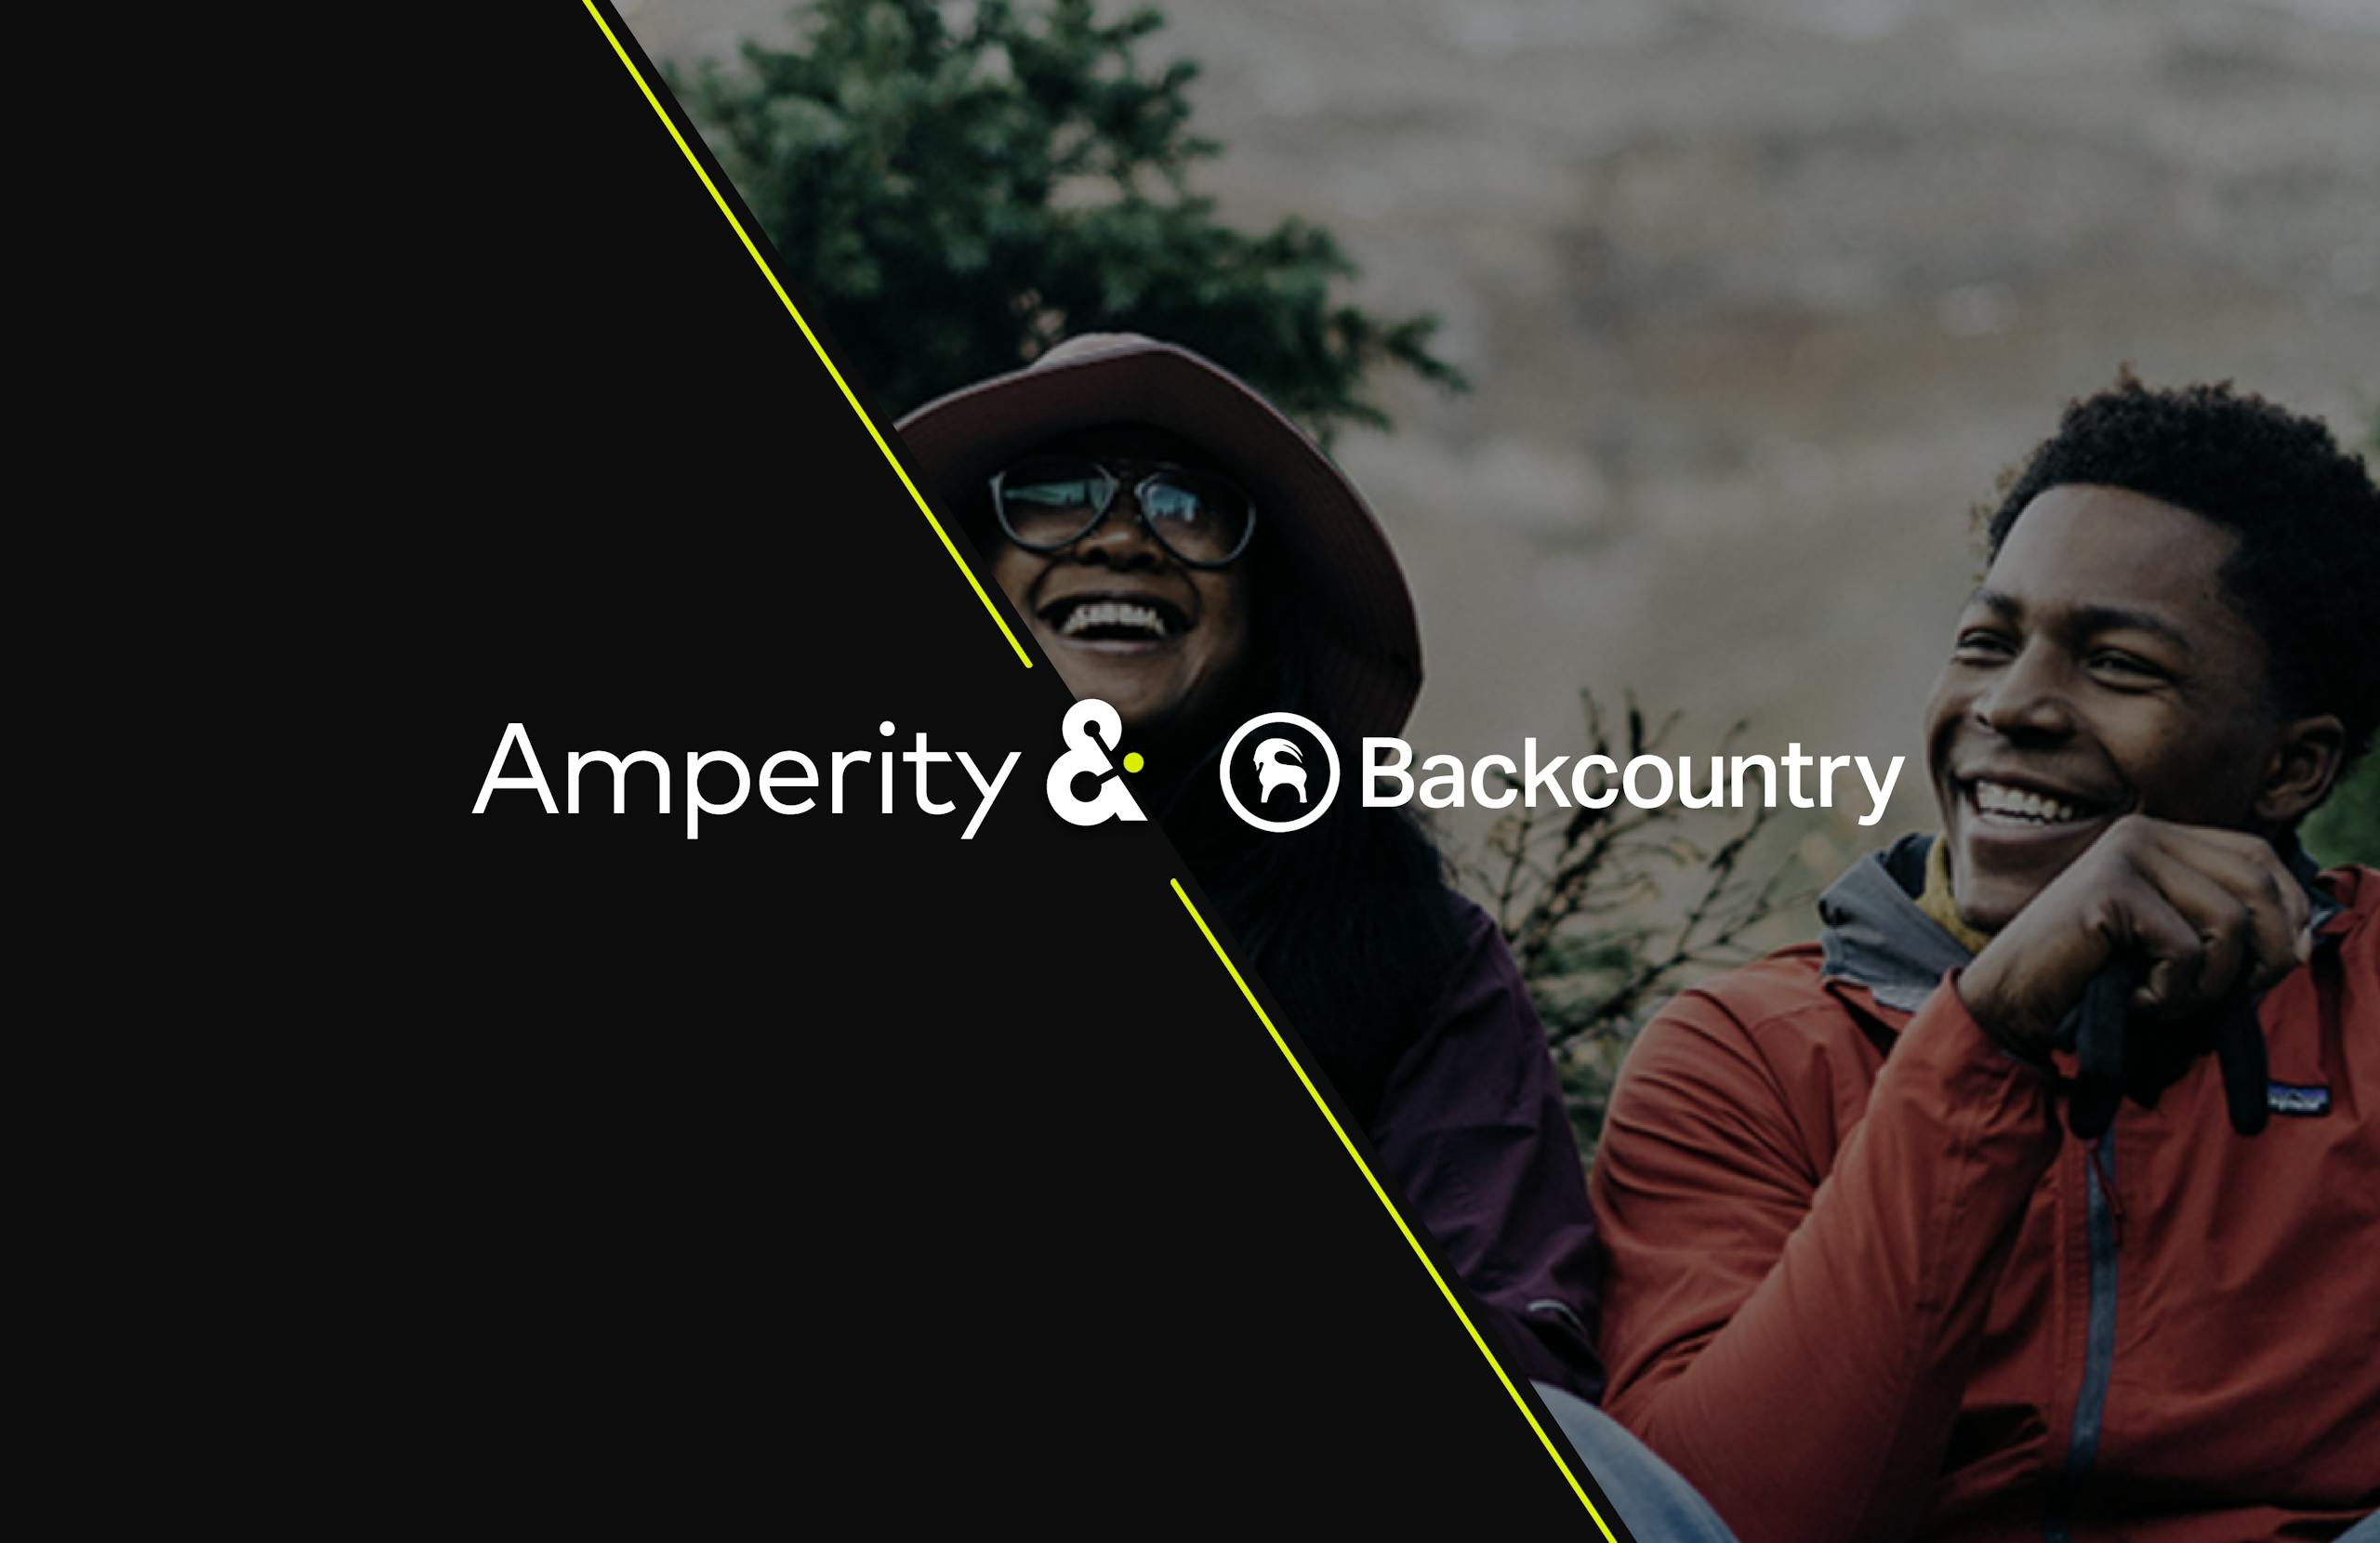 Amperity & Backcountry announcement image with both logos